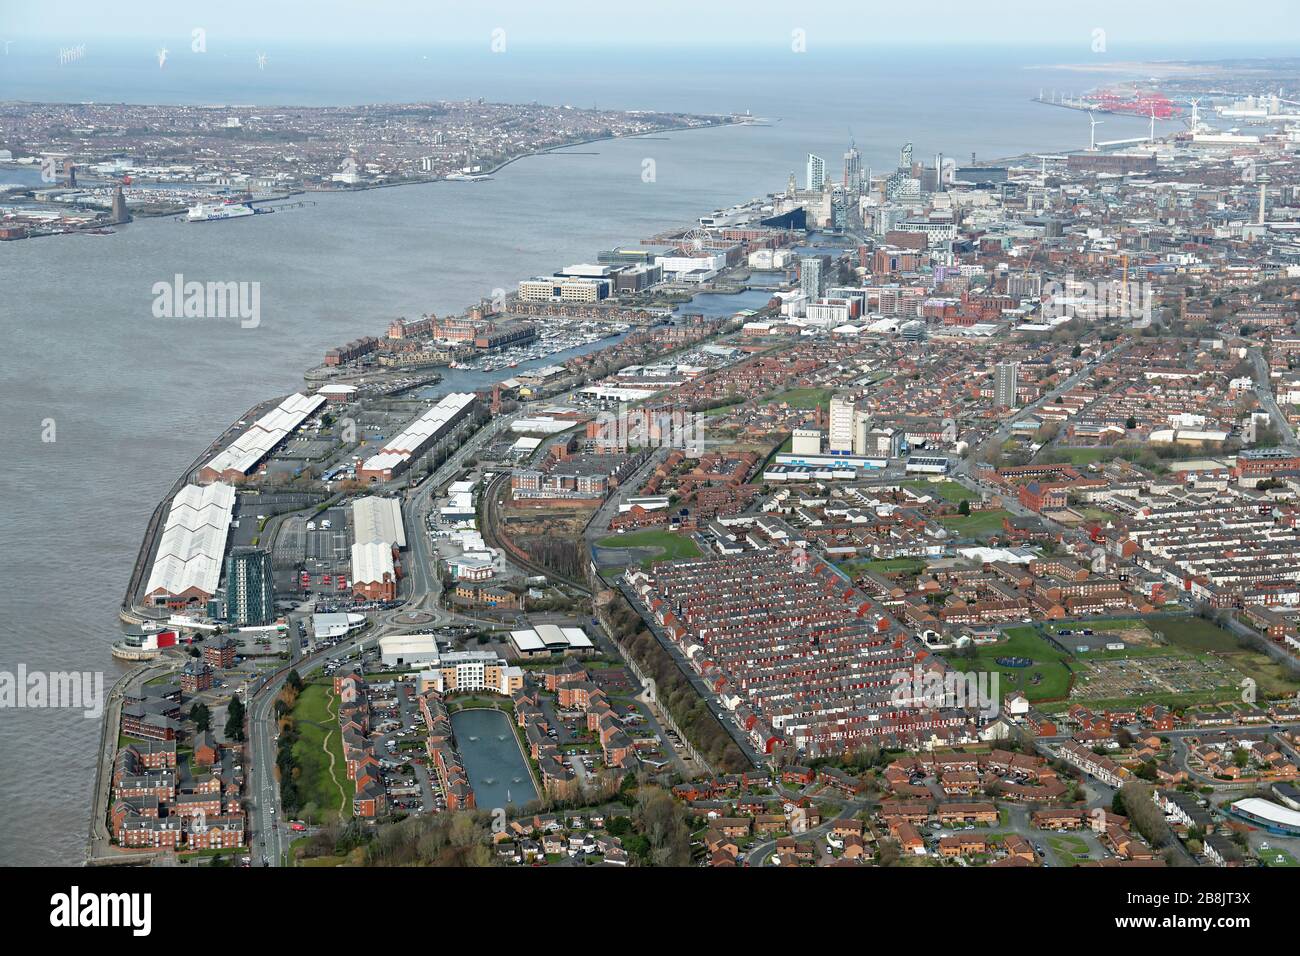 aerial view of Liverpool skyline with the Brunswick Business Centre & Spring City Trampoline Park in the foreground and Liver Building & Mersey behind Stock Photo